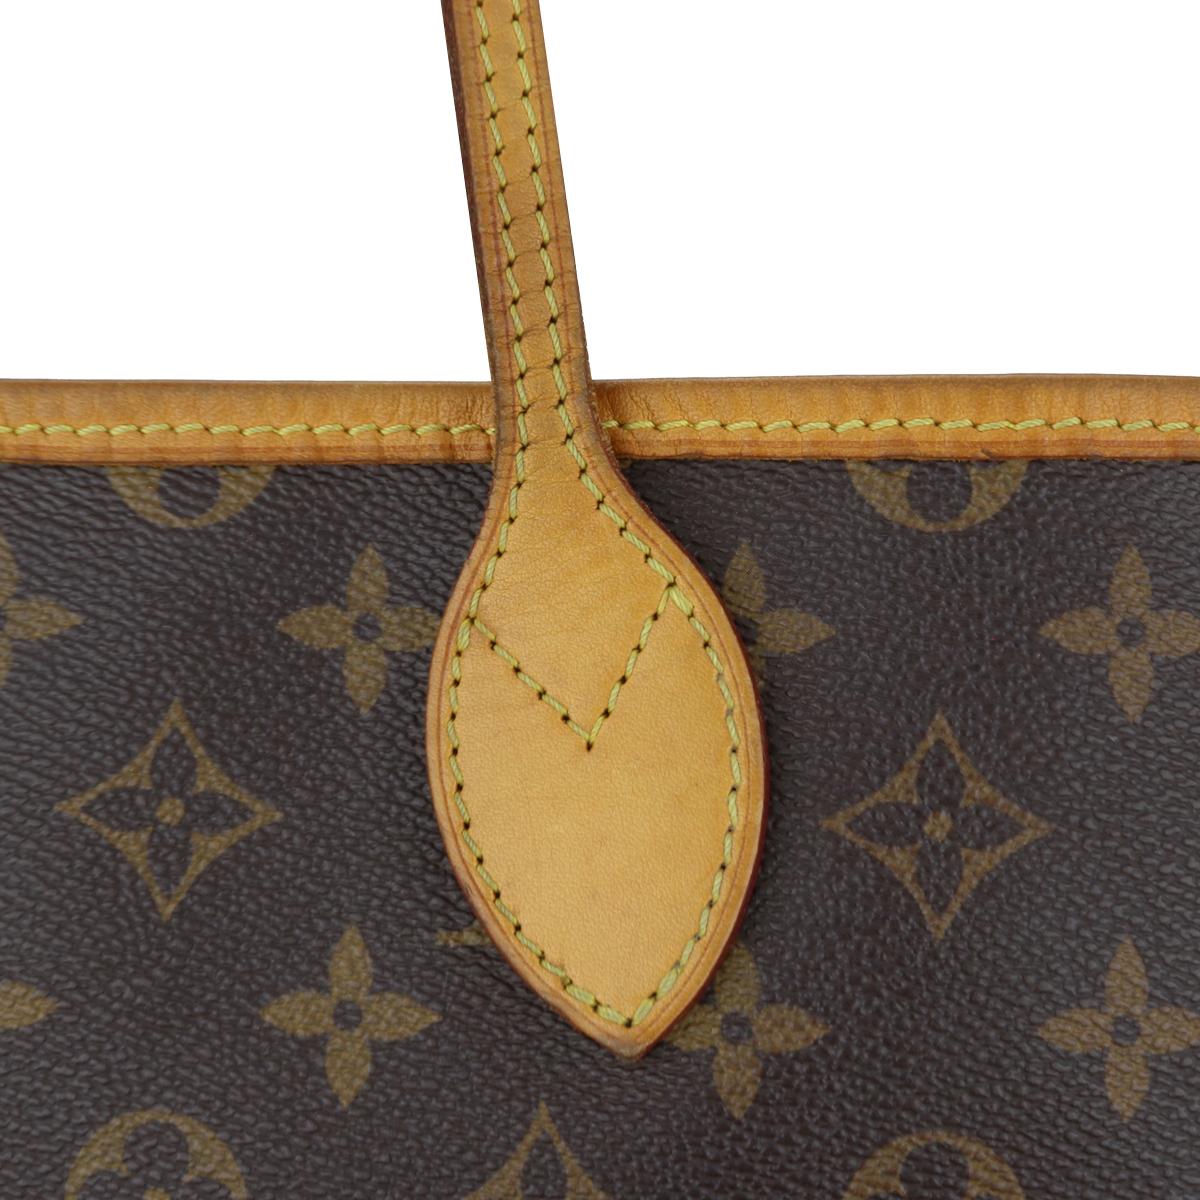 Louis Vuitton Neverfull GM Bag in Monogram with Beige Interior 2007 9